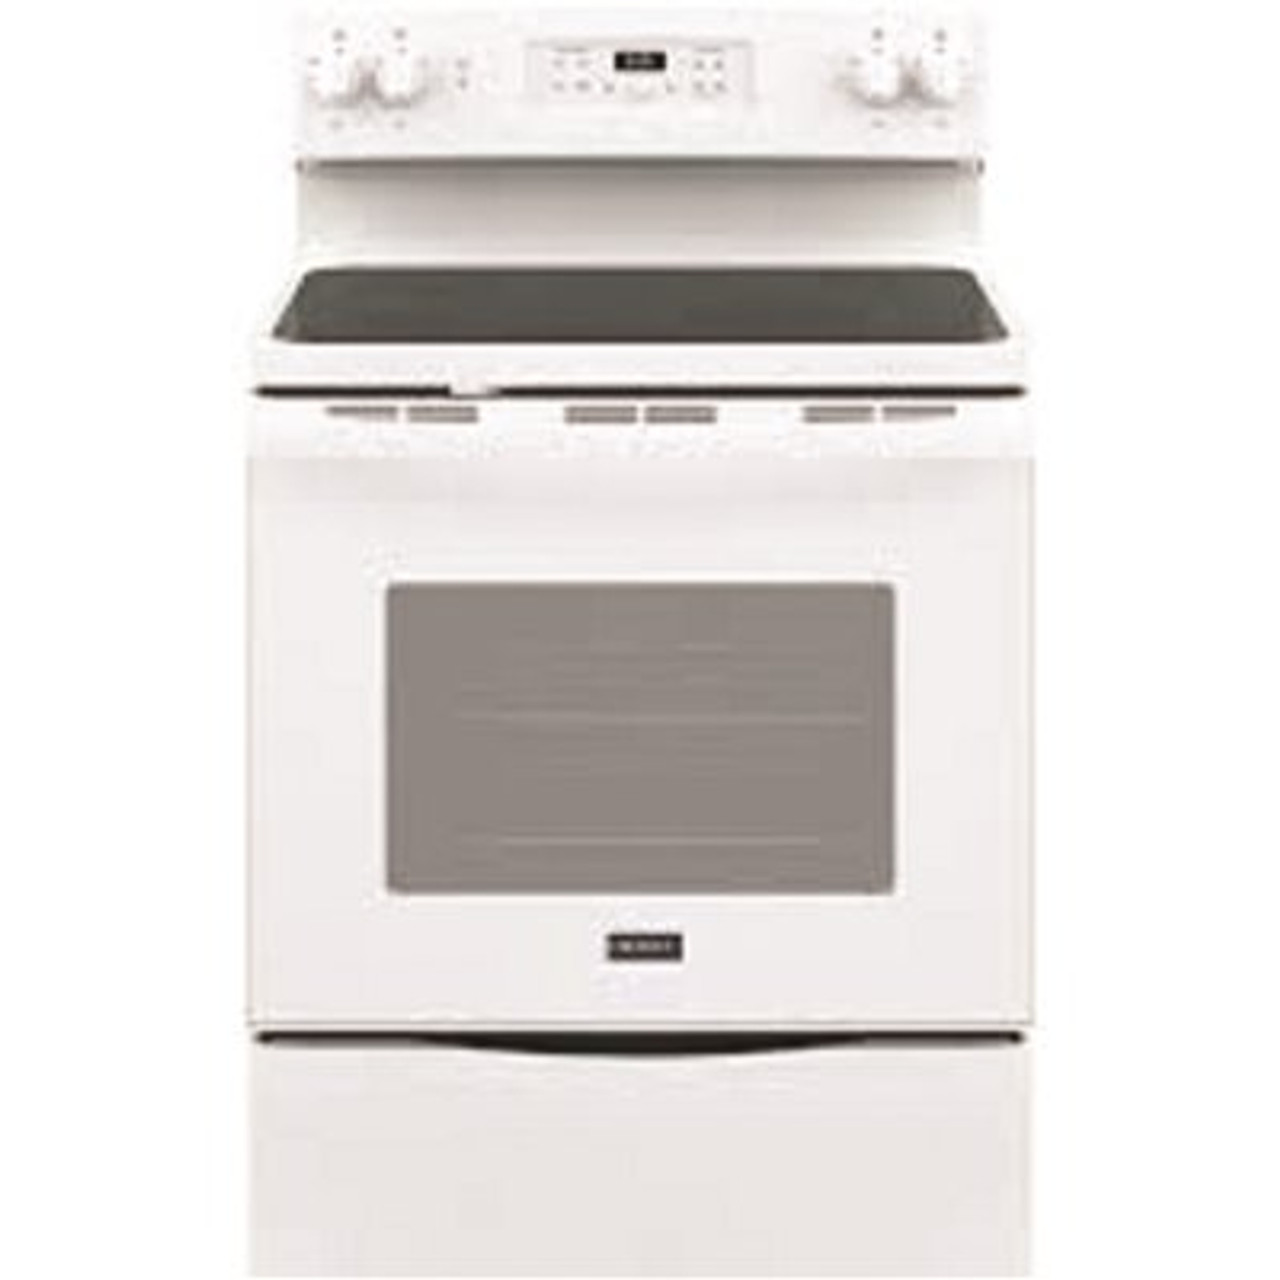 Crosley Range 30 in. 4 Elements Free Standing Electric Range with Coil Top in Stainless Steel